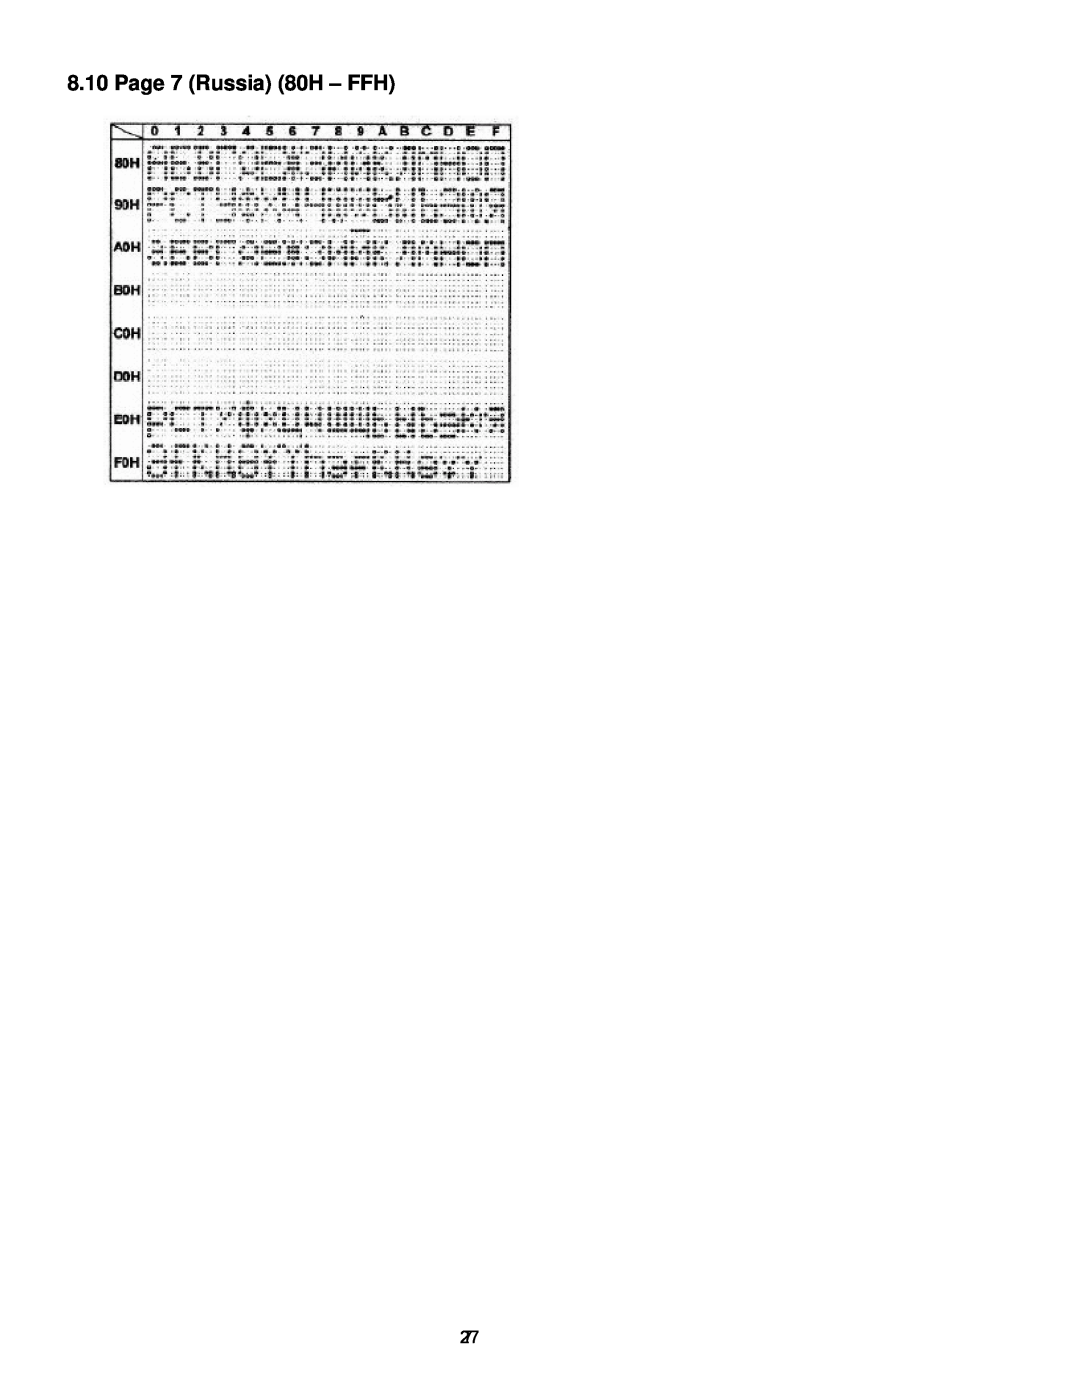 Epson P07303 user manual Page 7 Russia 80H - FFH 